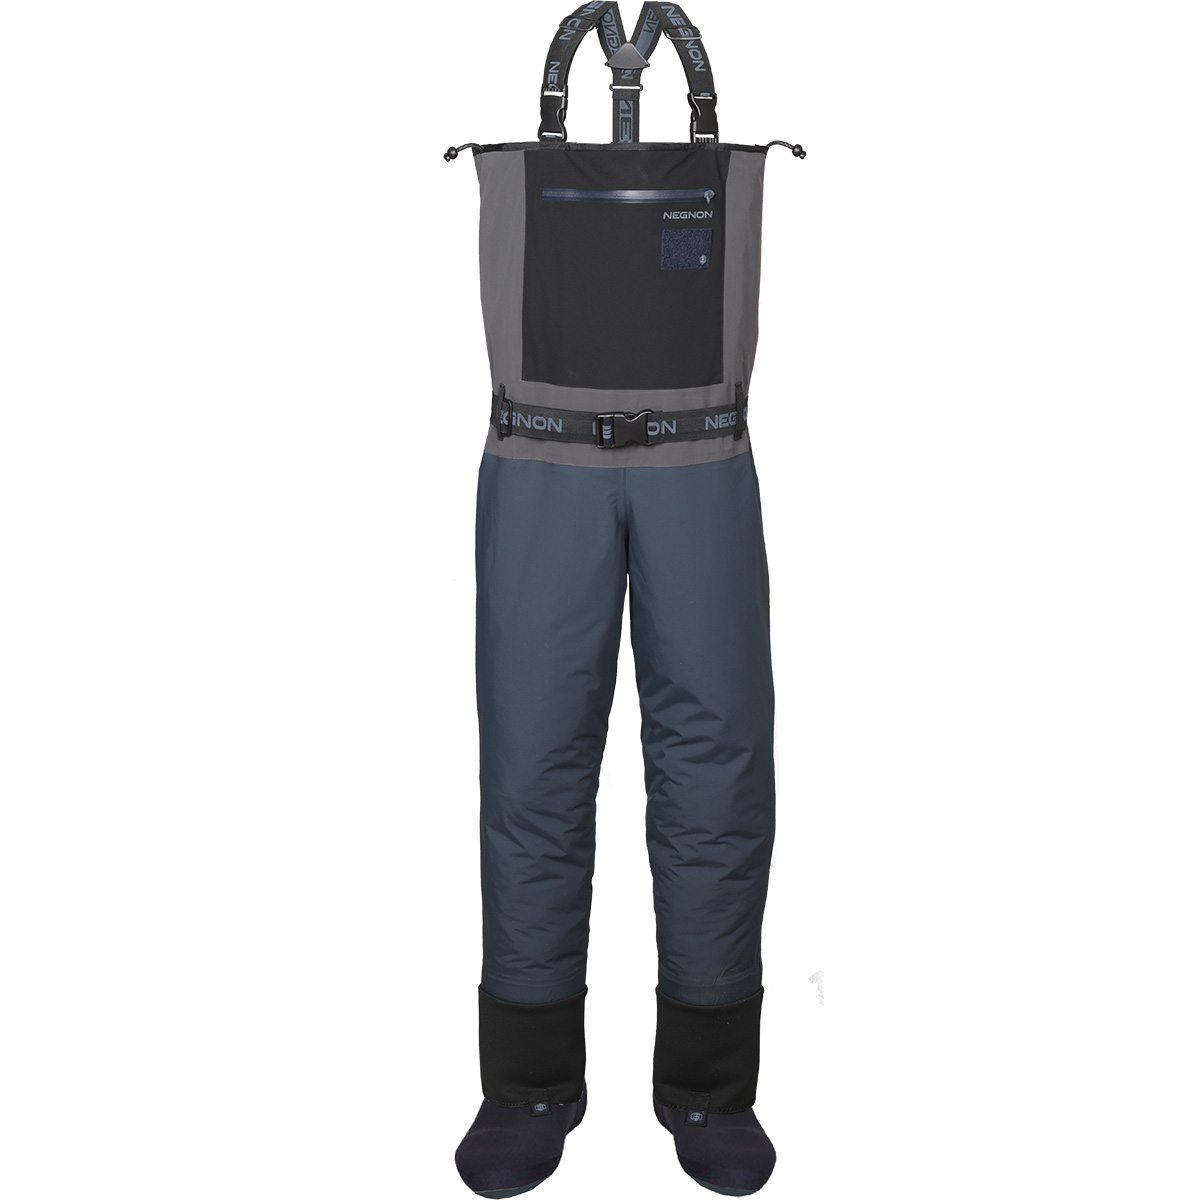 Negnon Omega Velorum Waders, Fishing waders - Chest, Hip and Pants - Taimen